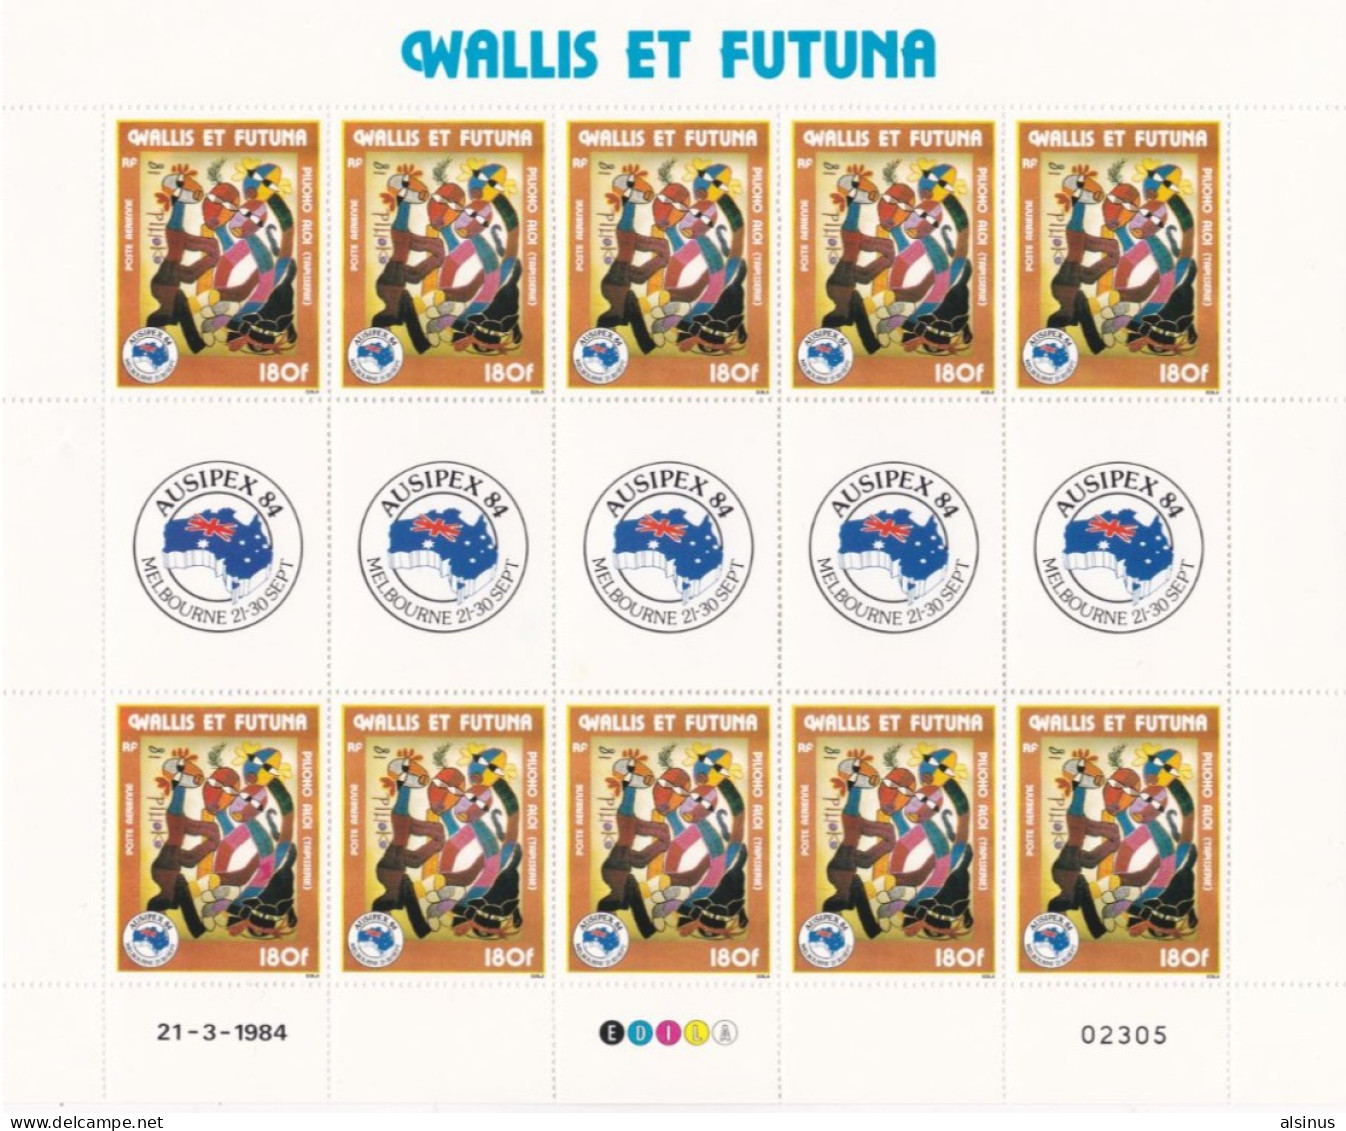 WALLIS ET FUTUNA - 1984 - N° 139 - POSTE AERIENNE - 180 F - EXPOSITION AUSIPEX 84 MELBOURNE -  FEUILLET 10 TIMBRES NEUFS - Unused Stamps